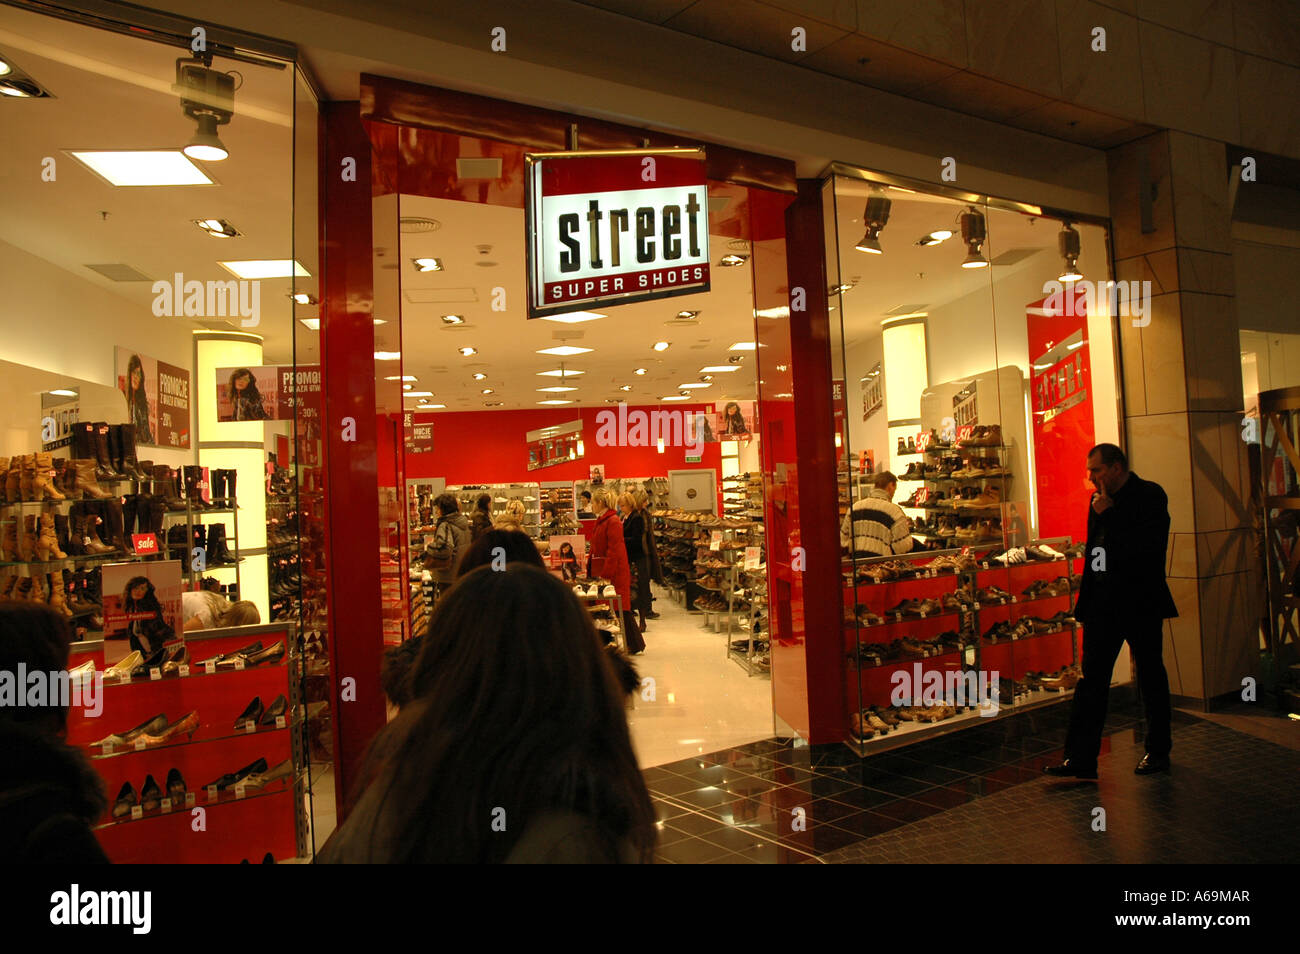 City Centre Shoe Shop High Resolution Stock Photography and Images - Alamy